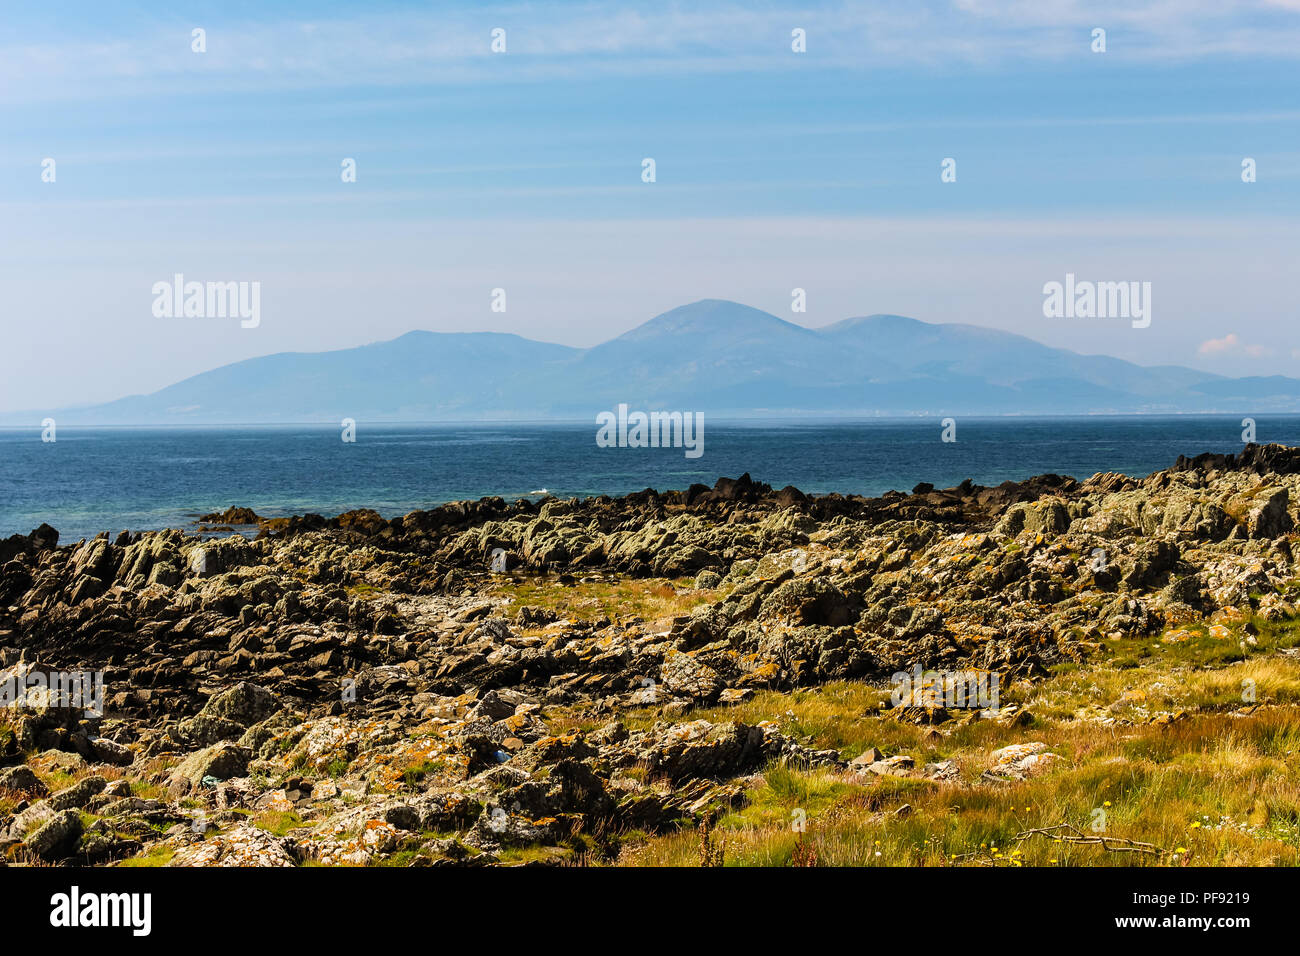 View from St John's Point over the rocky coastline and sea to the Mourne Mountains, N.Ireland. Stock Photo